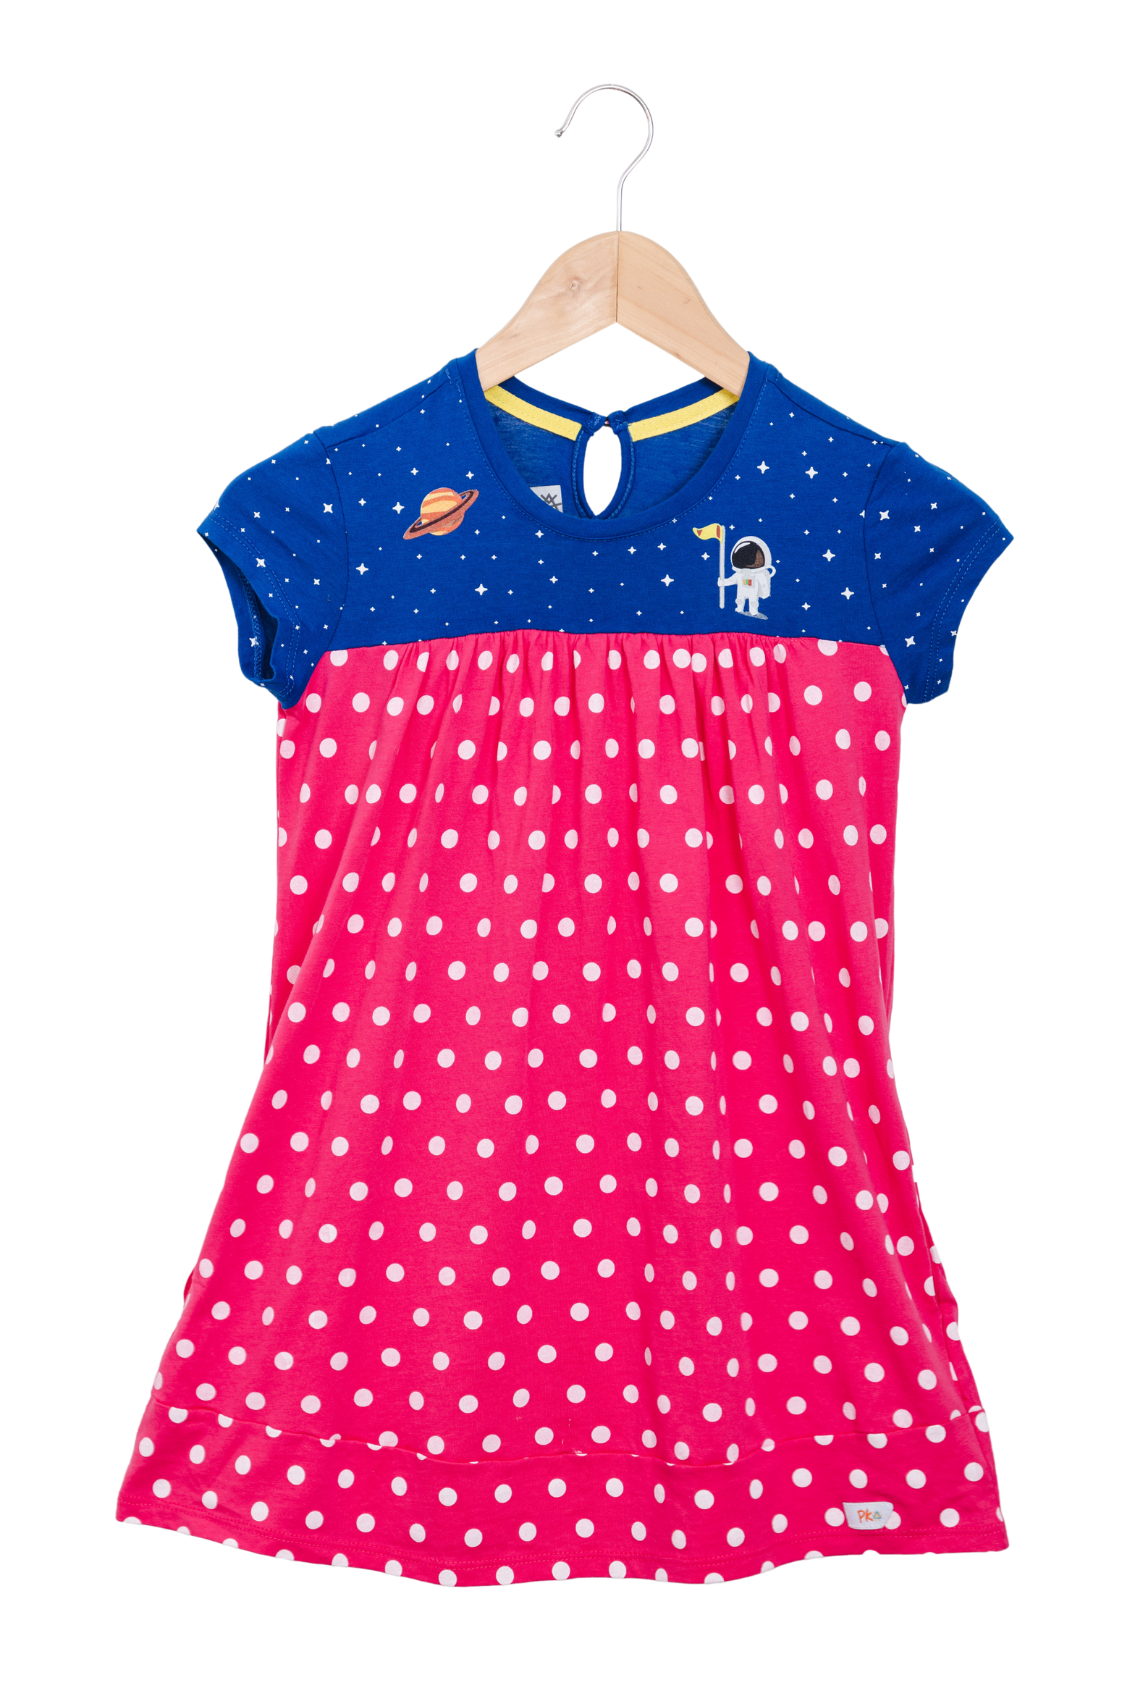 Pink and blue astronaut dress with pockets, girl dress, eco-friendly material, STEM and non-Stereotypical designs by Prisma Kiddos